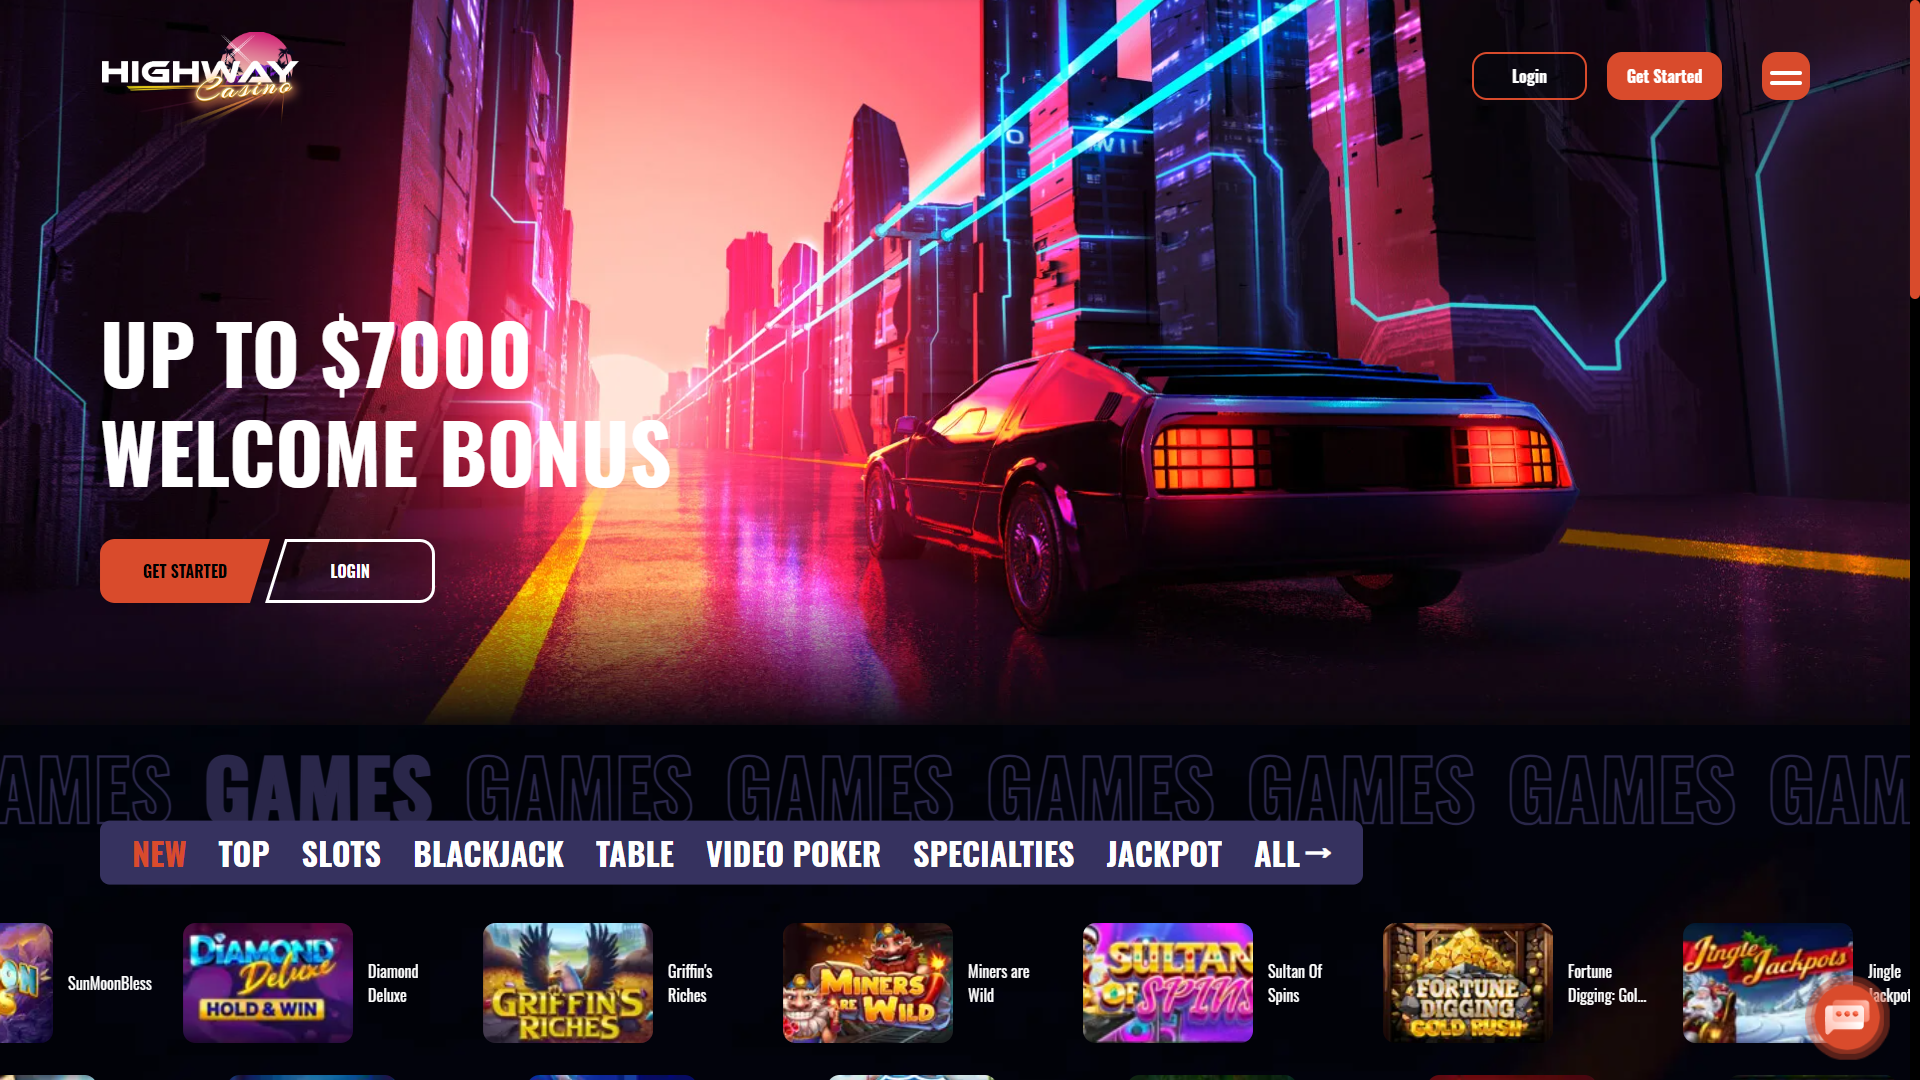 Highway Casino Home Page